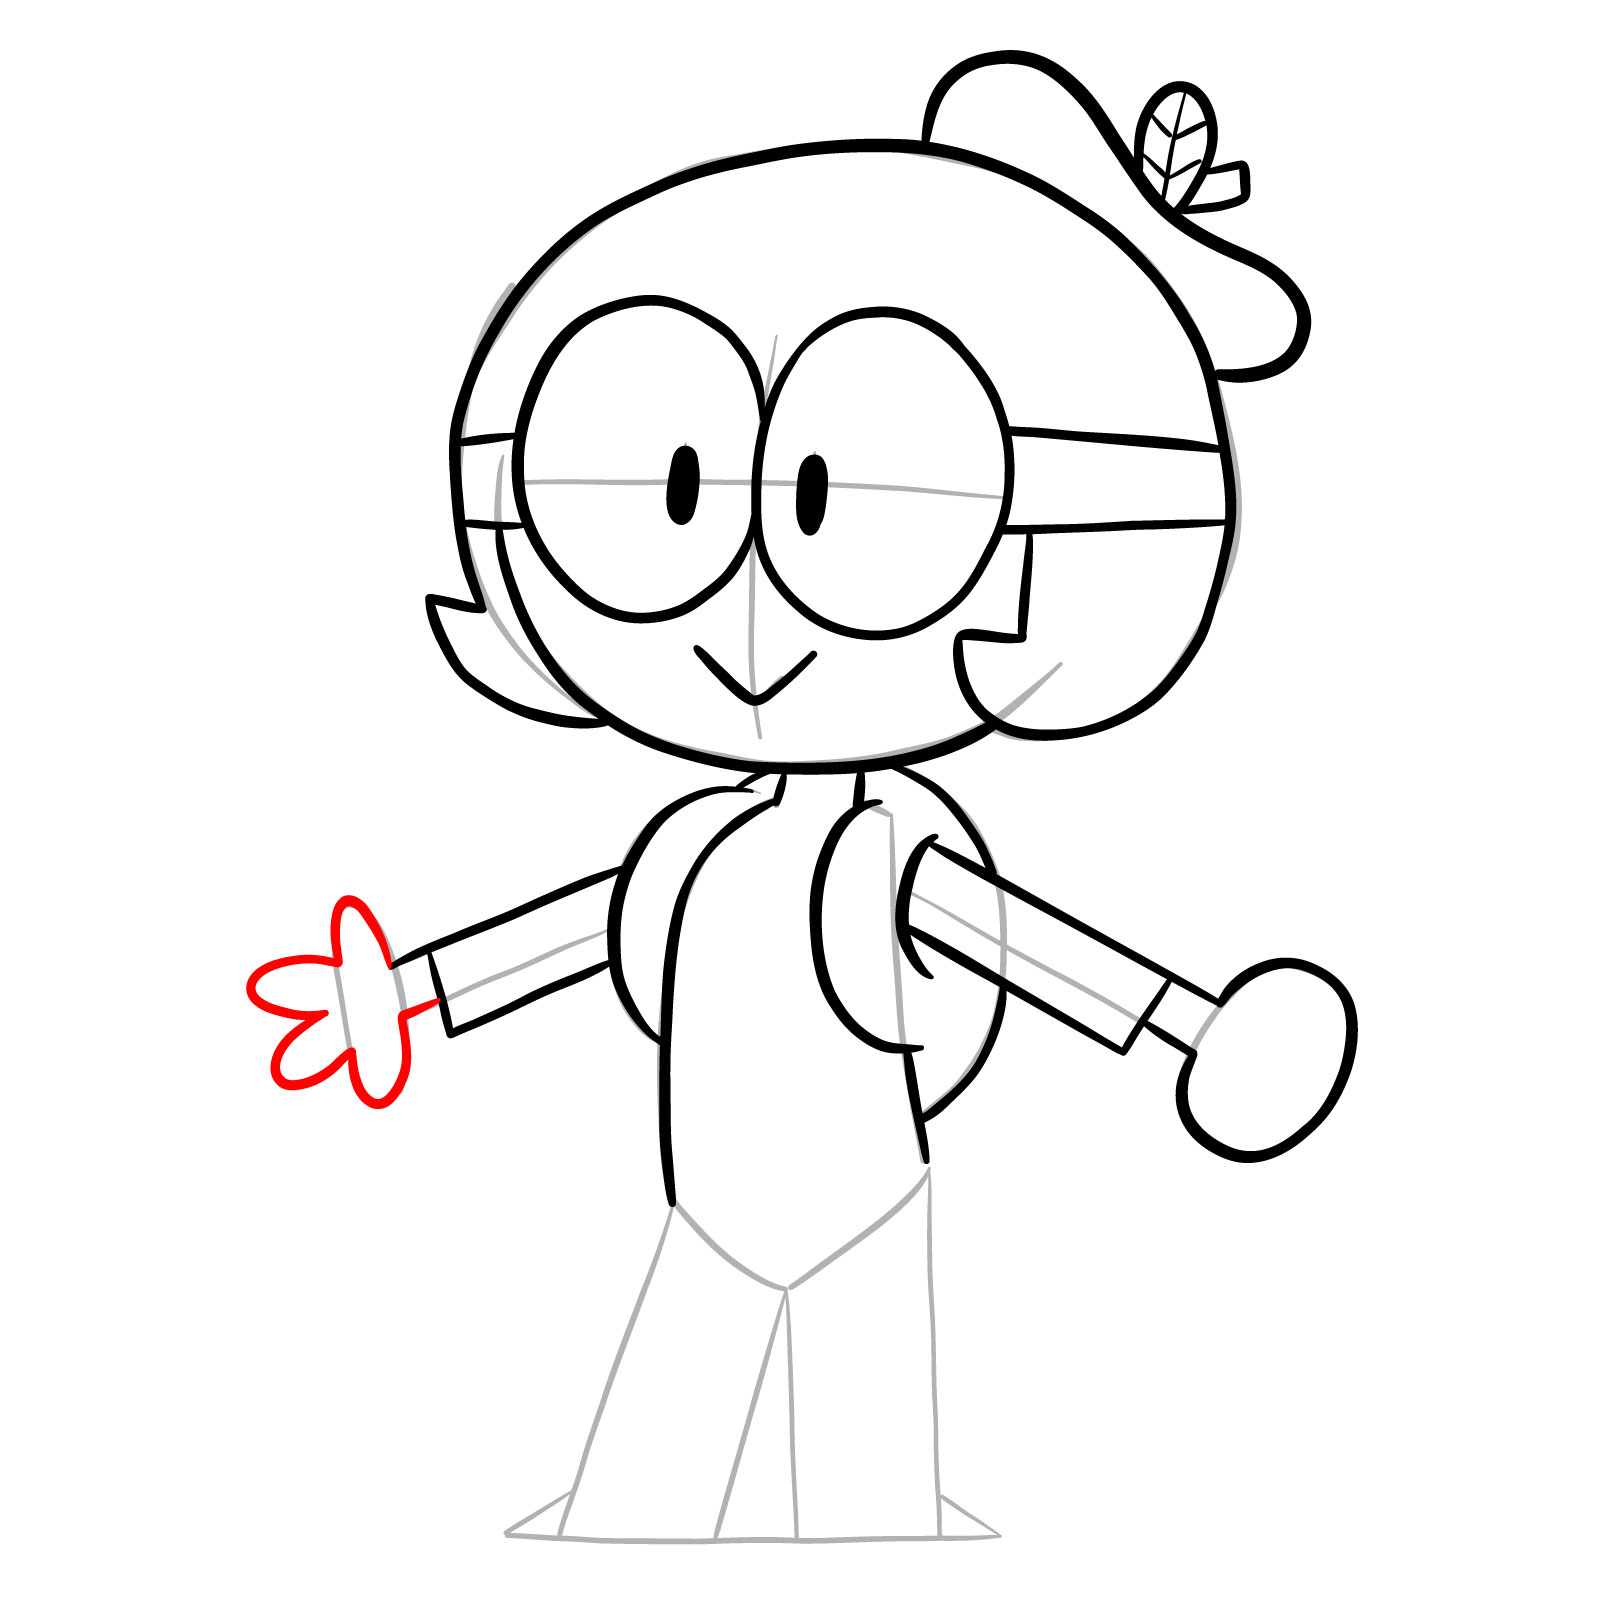 How to draw Dendy from OK K.O.! - step 17